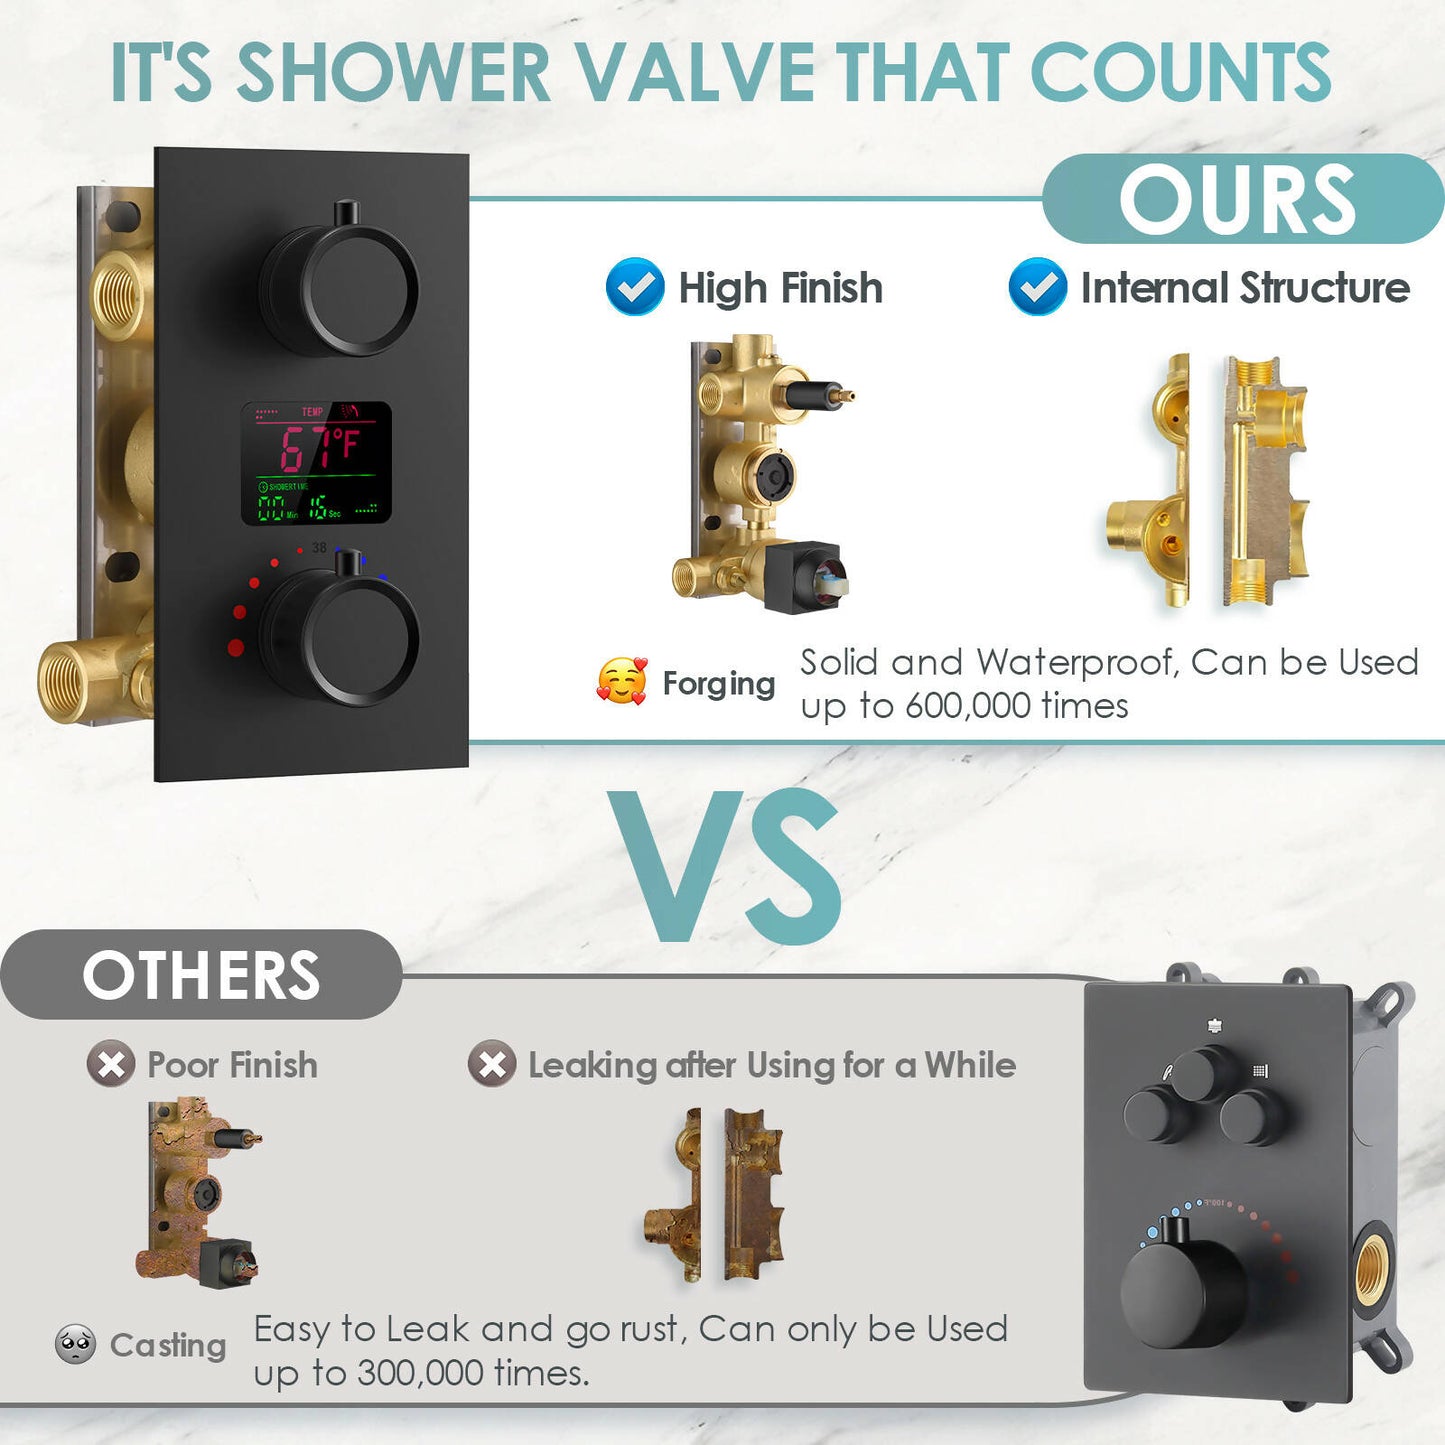 SmartTempFlow 12" High-Pressure Rainfall Shower Faucet, Ceiling Mount, Rough in-Valve, 2.5 GPM